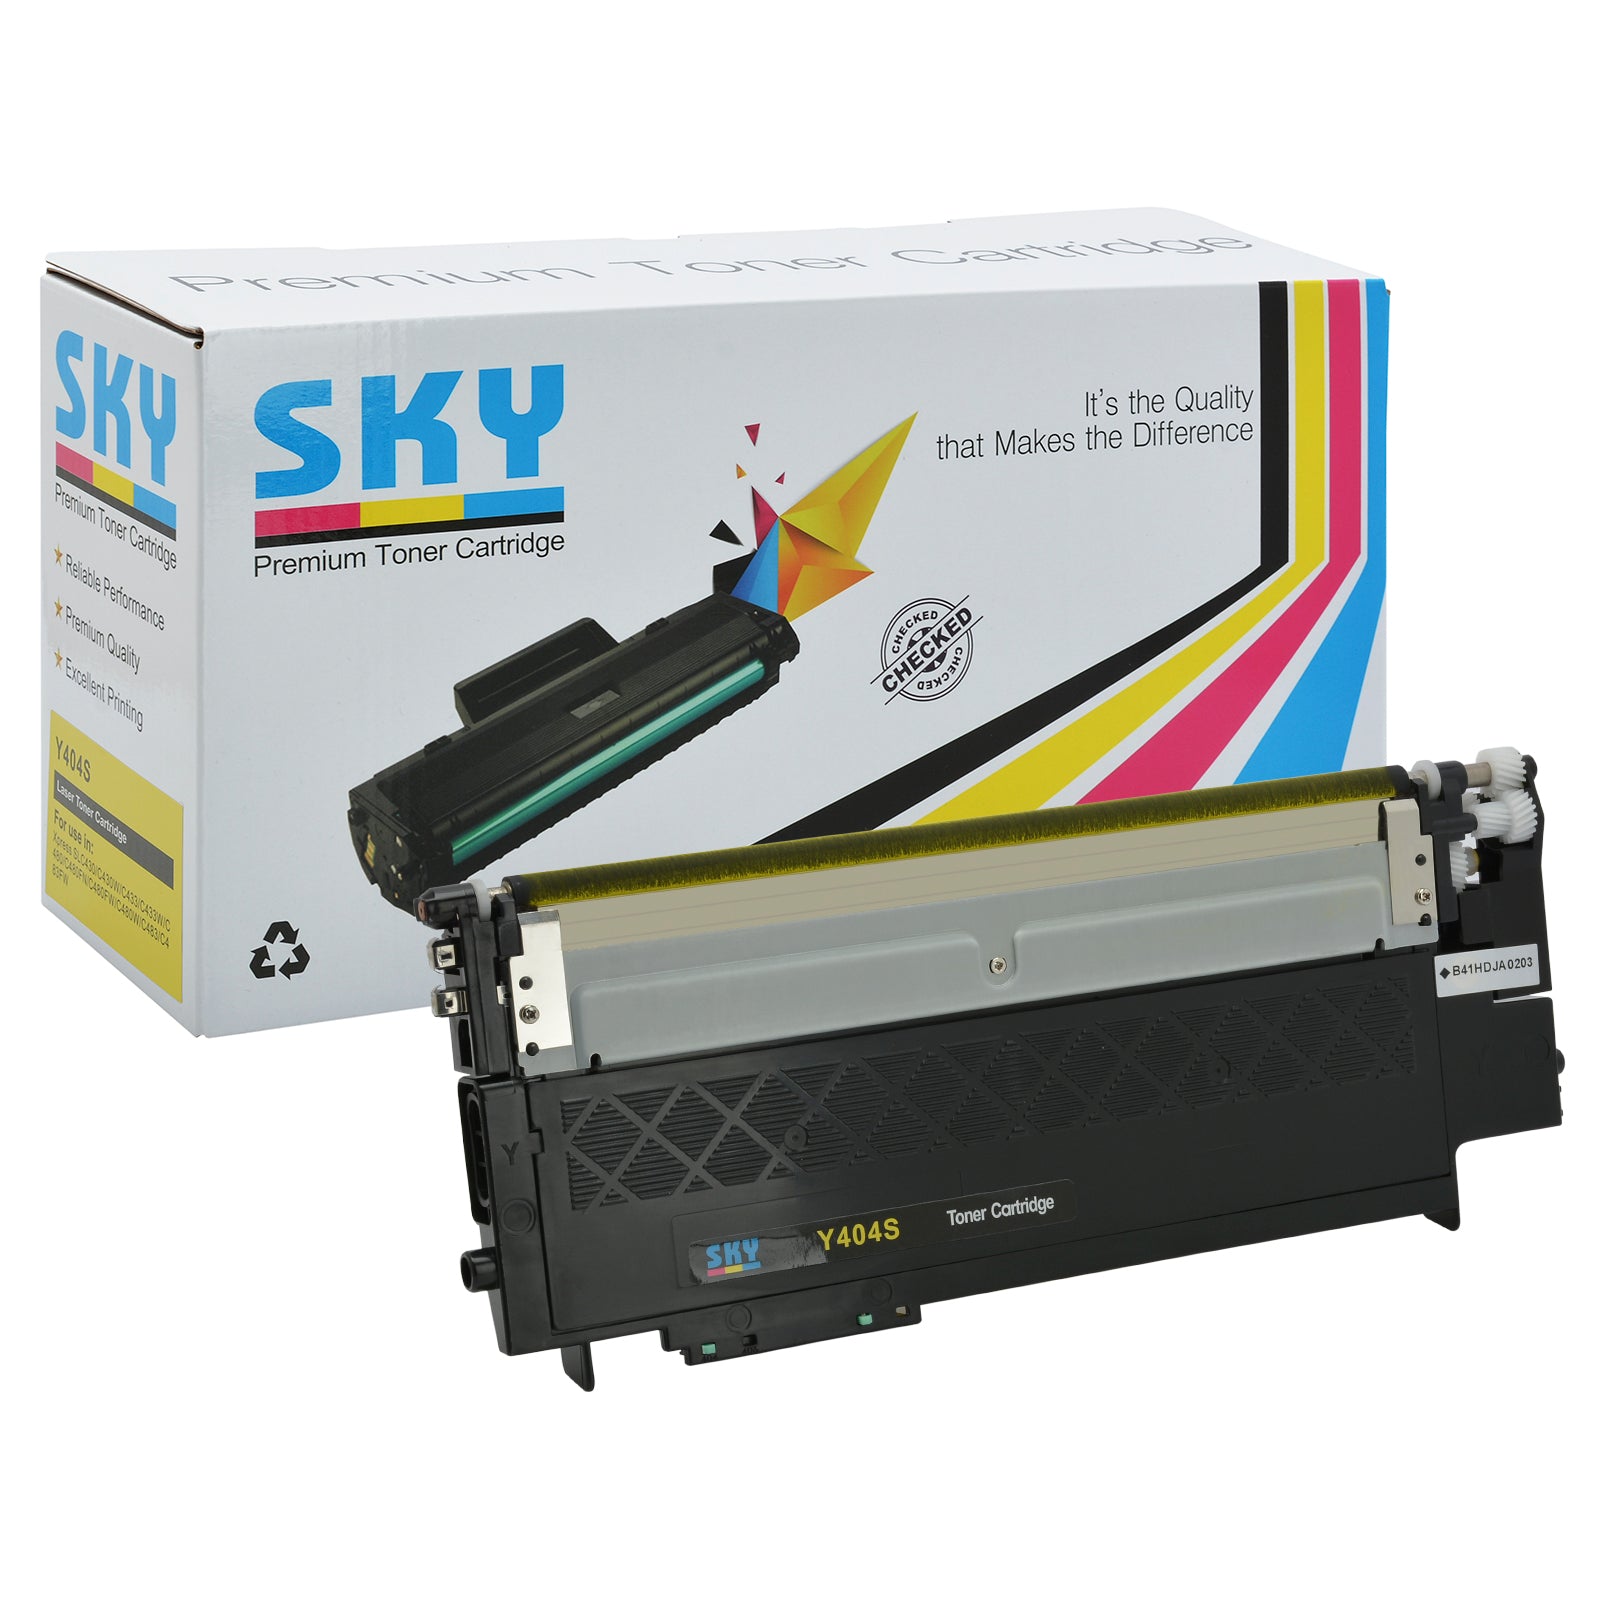 SKY  404  Compatible Toner Cartridge for Samsung Xpress C430 and C480 series Printers